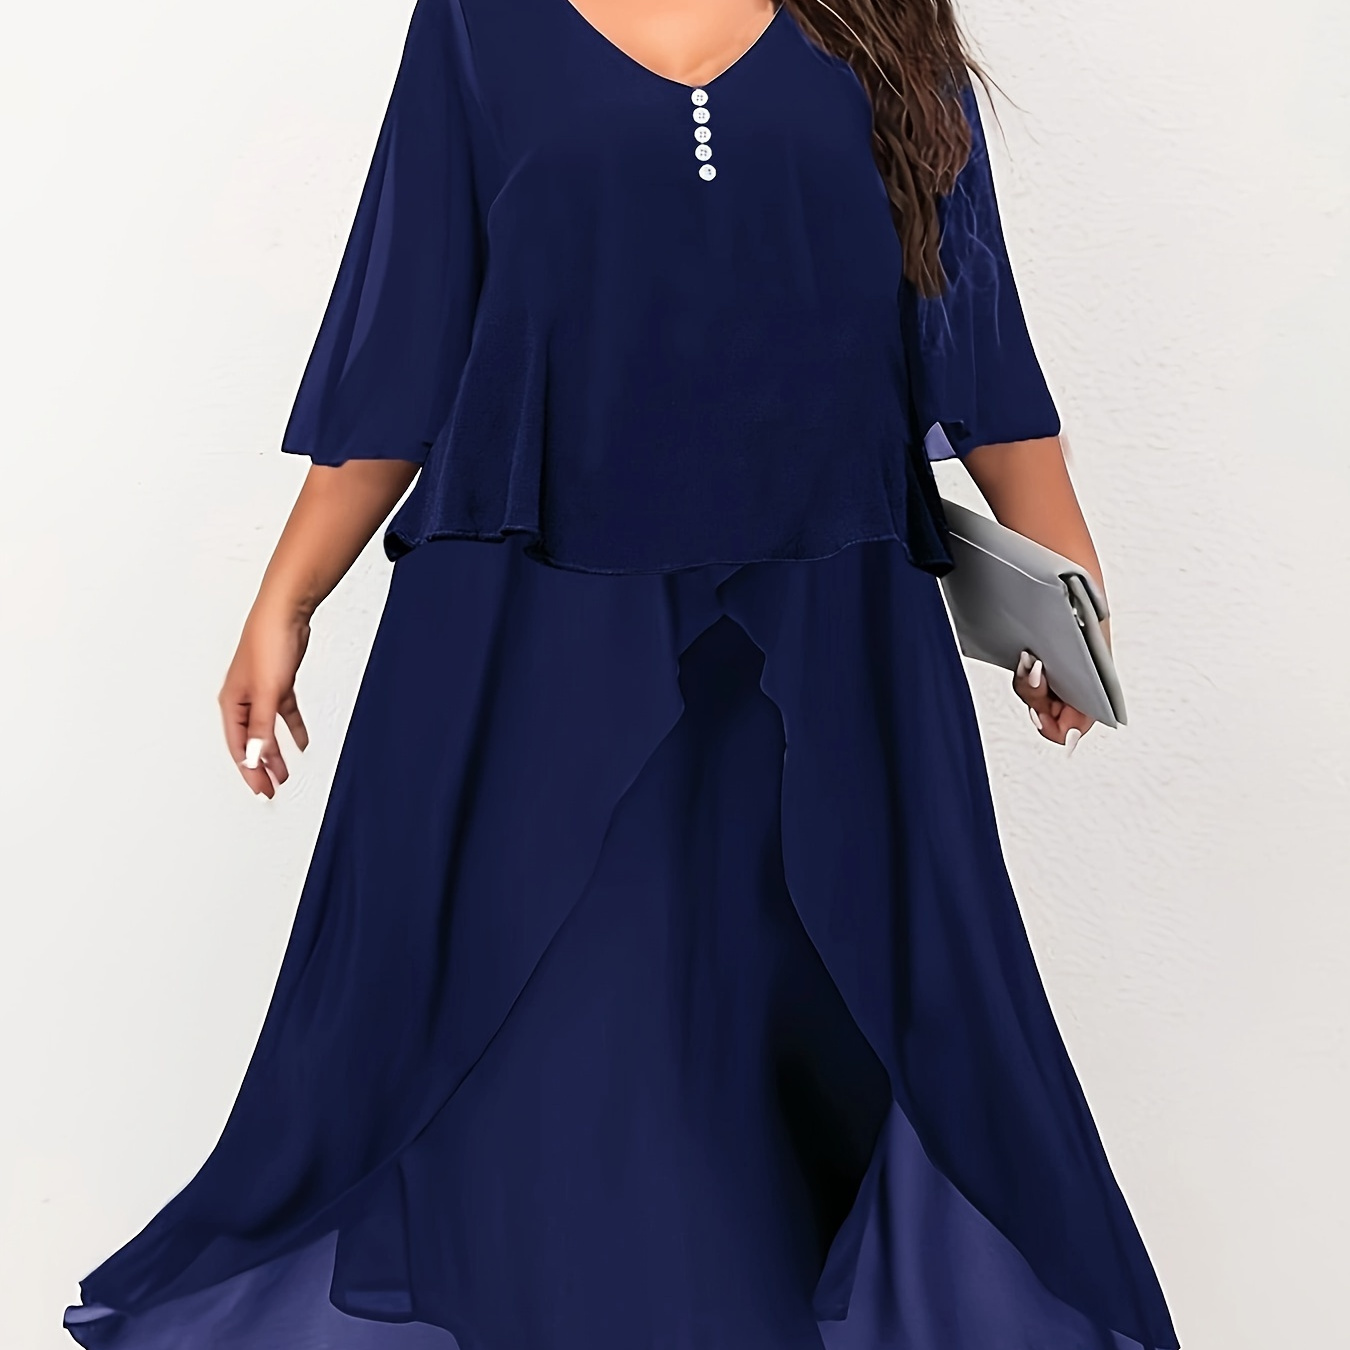 

2 In 1 Plus Size Solid Button Front Loose Dress, Casual Half Sleeve Paneled Dress For Spring & Summer, Women's Plus Size Clothing